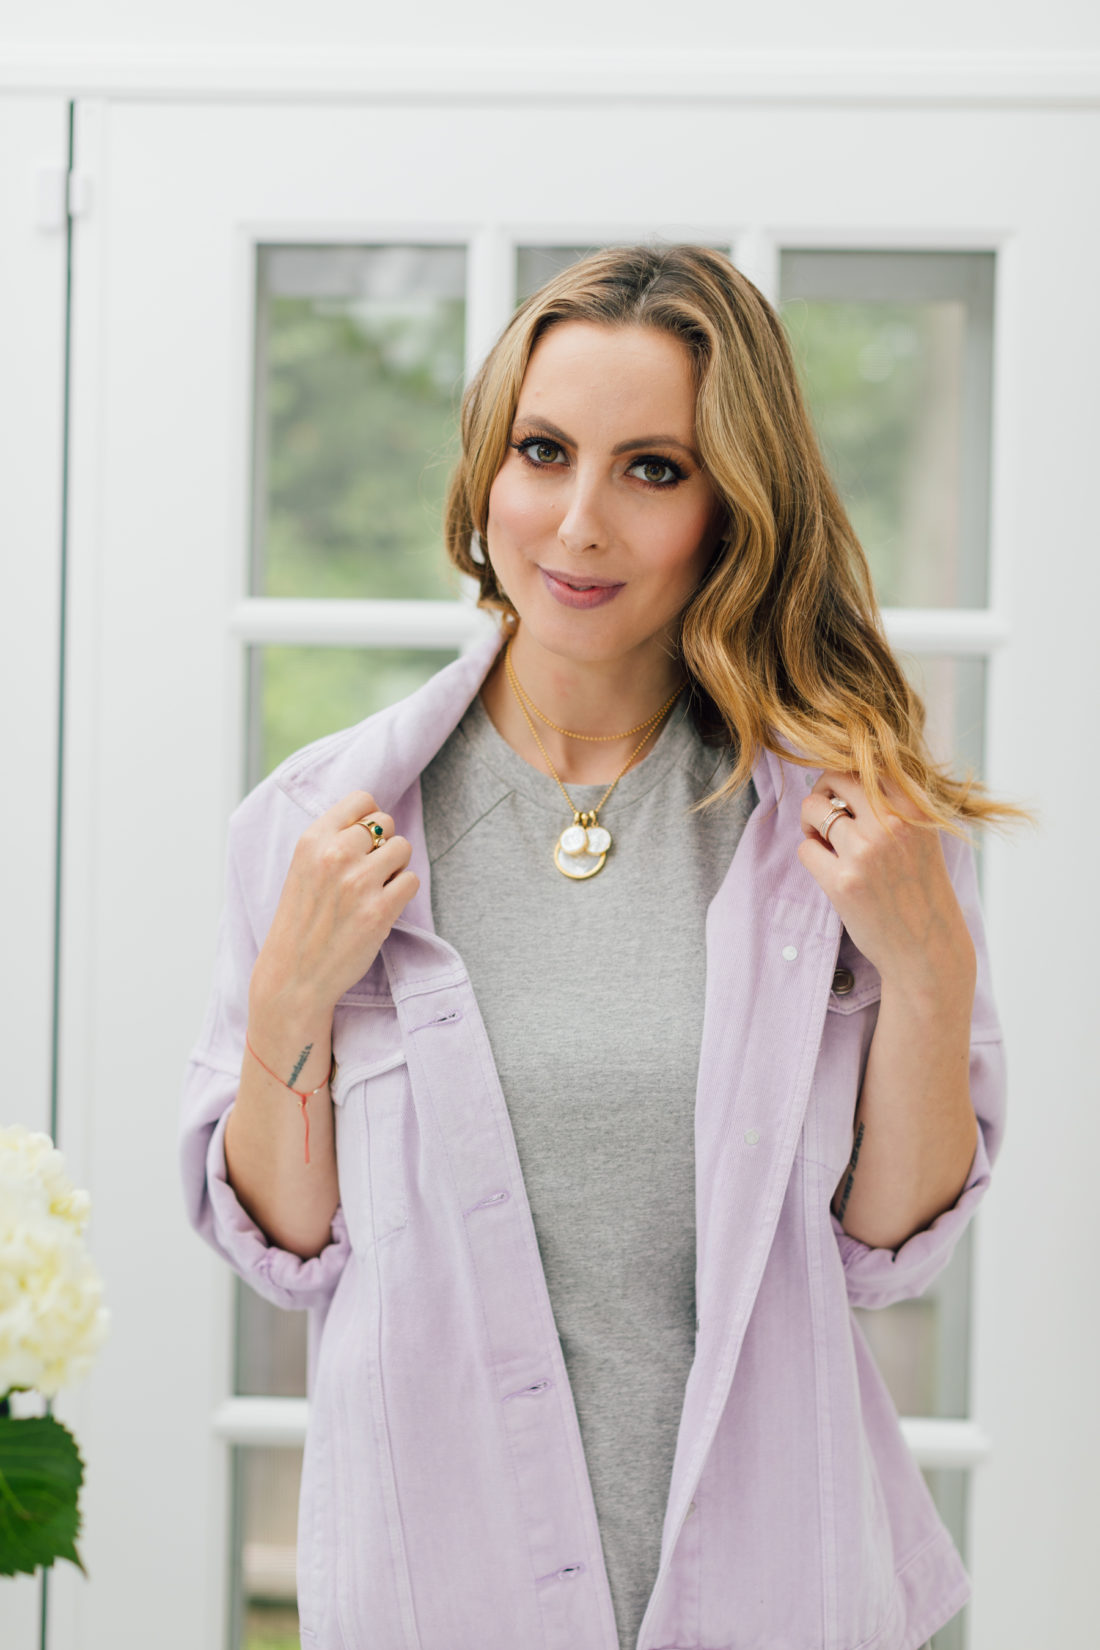 Eva Amurri Martino shares her September 2019 Obsessions which includes this ASHA Mother Of Pearl Customizable Necklace